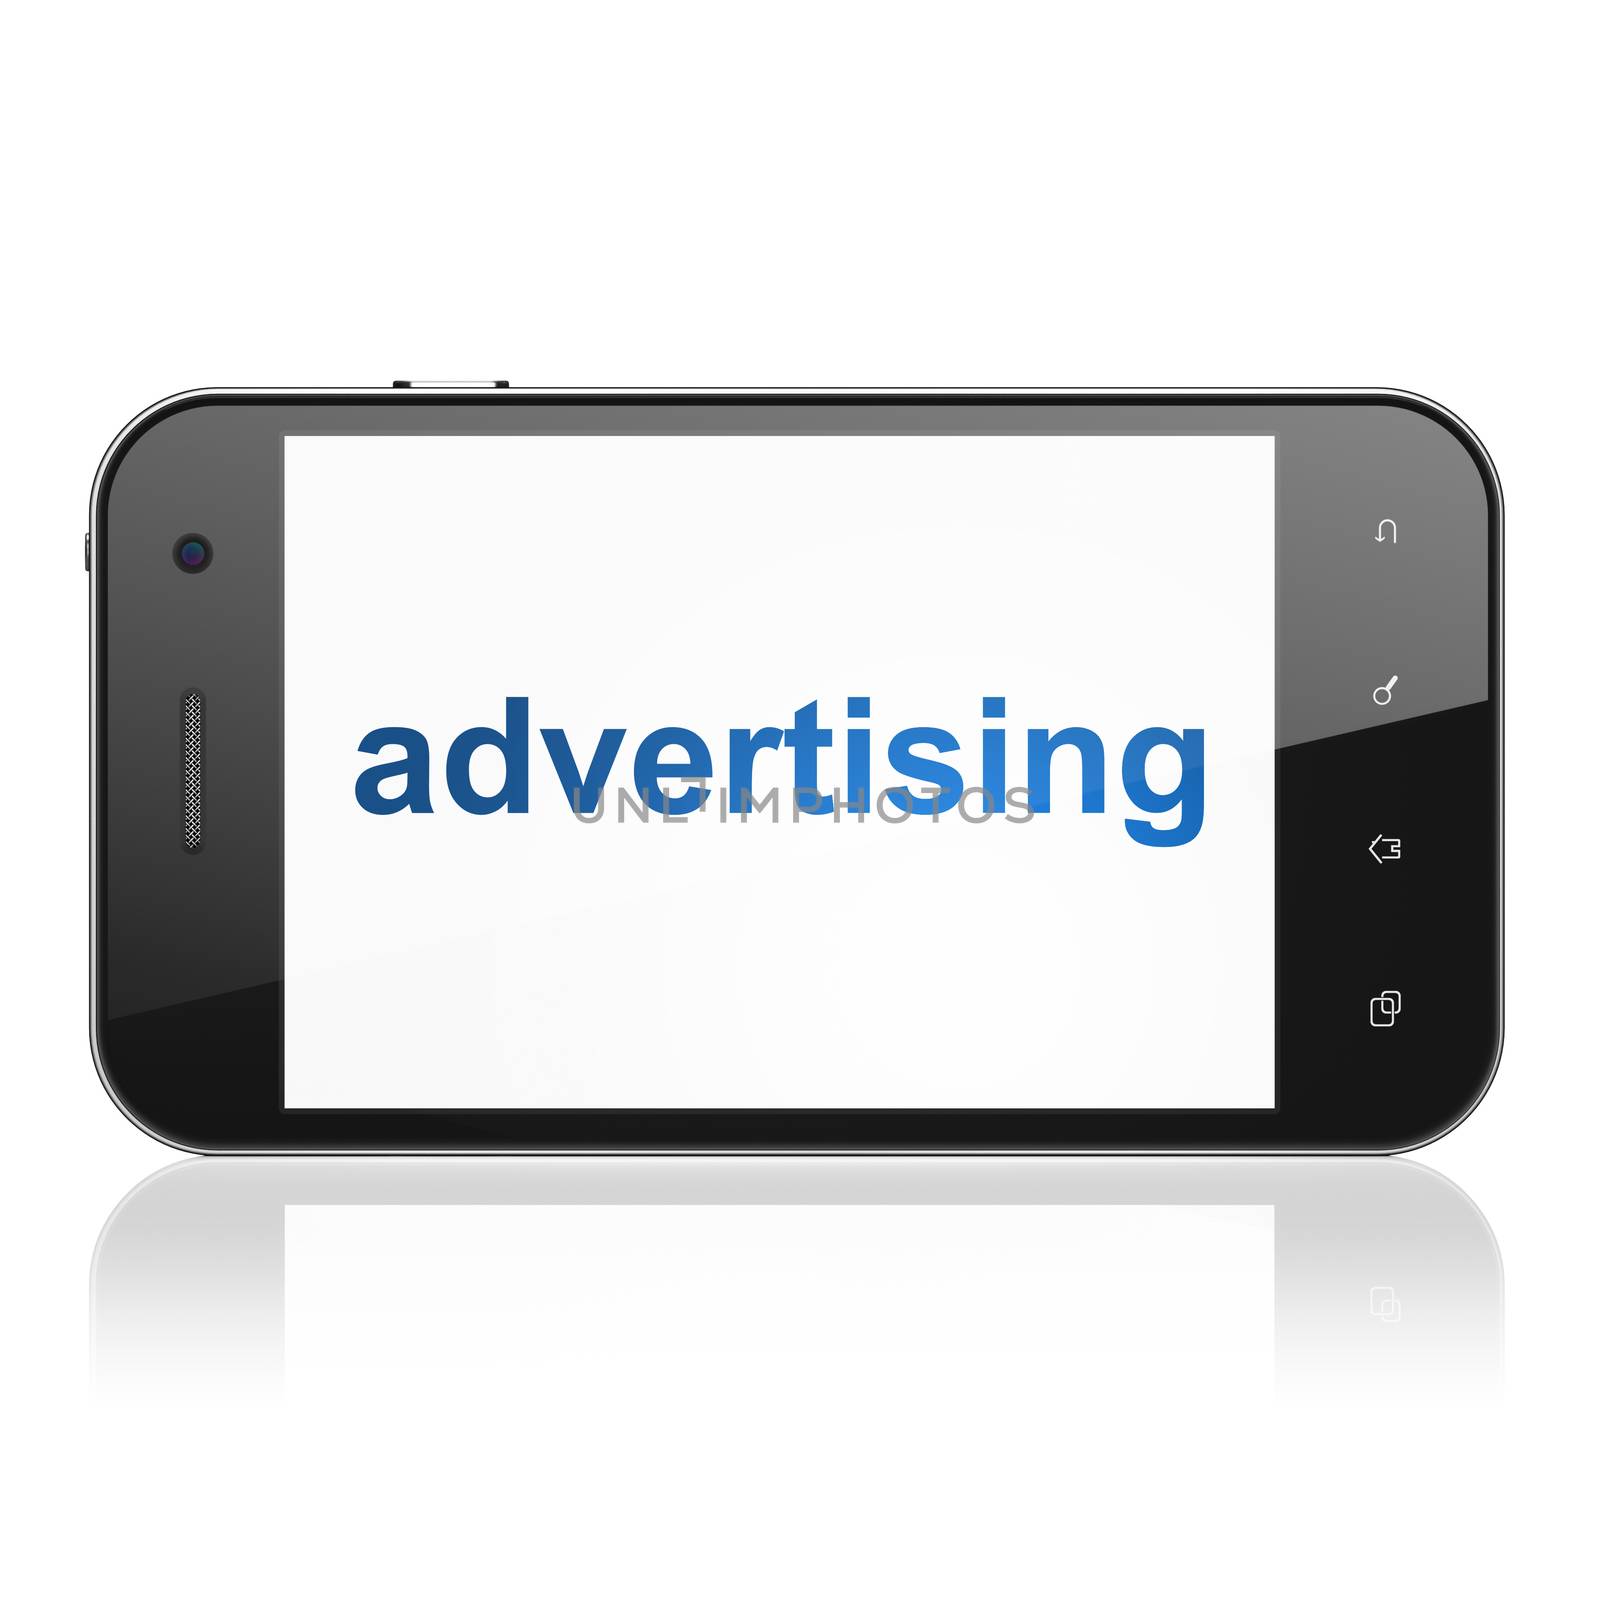 Marketing concept: smartphone with text Advertising on display. Mobile smart phone on White background, cell phone 3d render